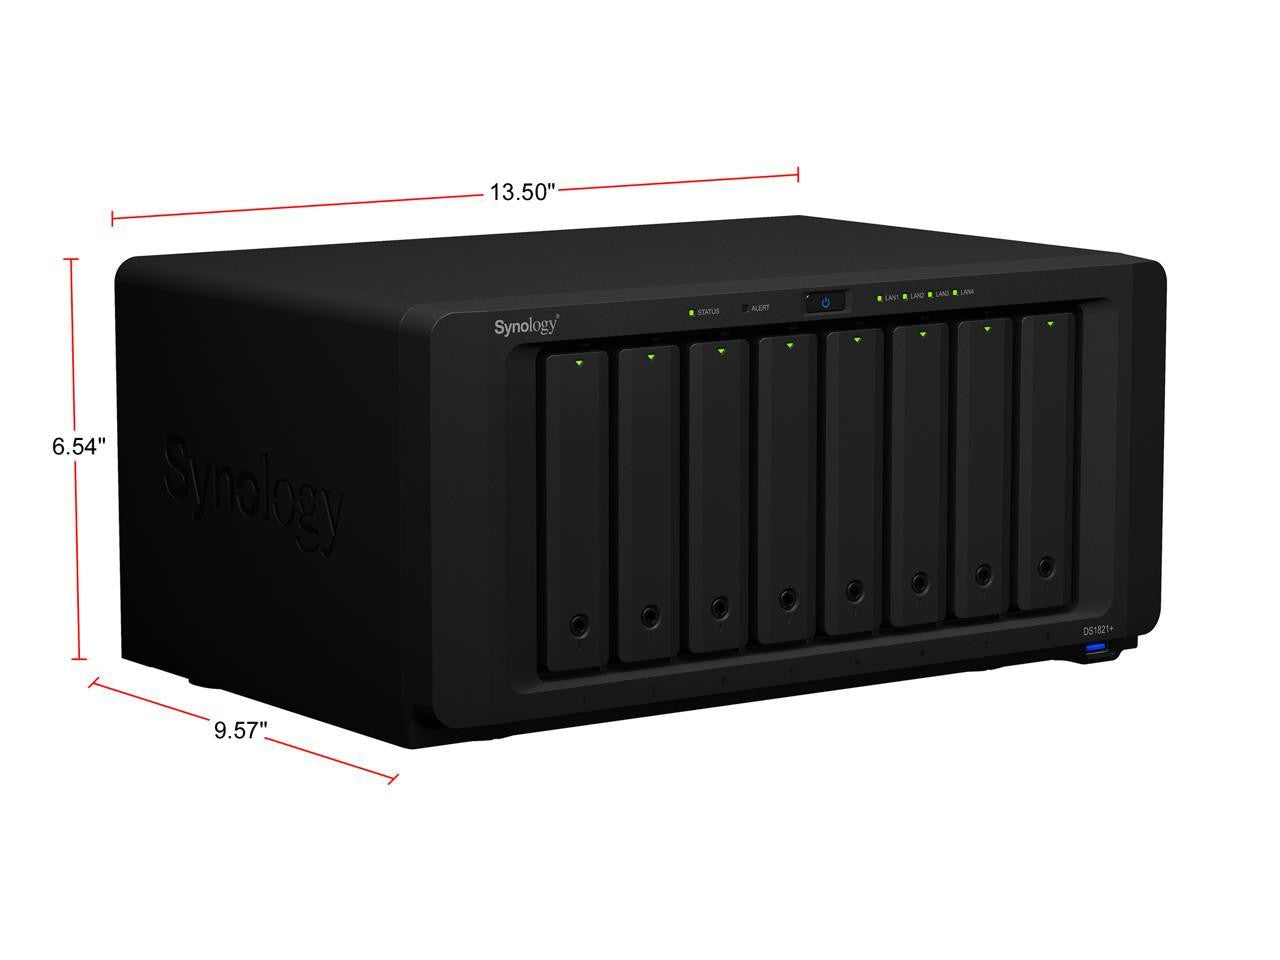 Synology DS1821+ 8-BAY DiskStation with 32GB Synology RAM and 112TB (8x14TB) Western Digital RED PLUS Drives Fully Assembled and Tested